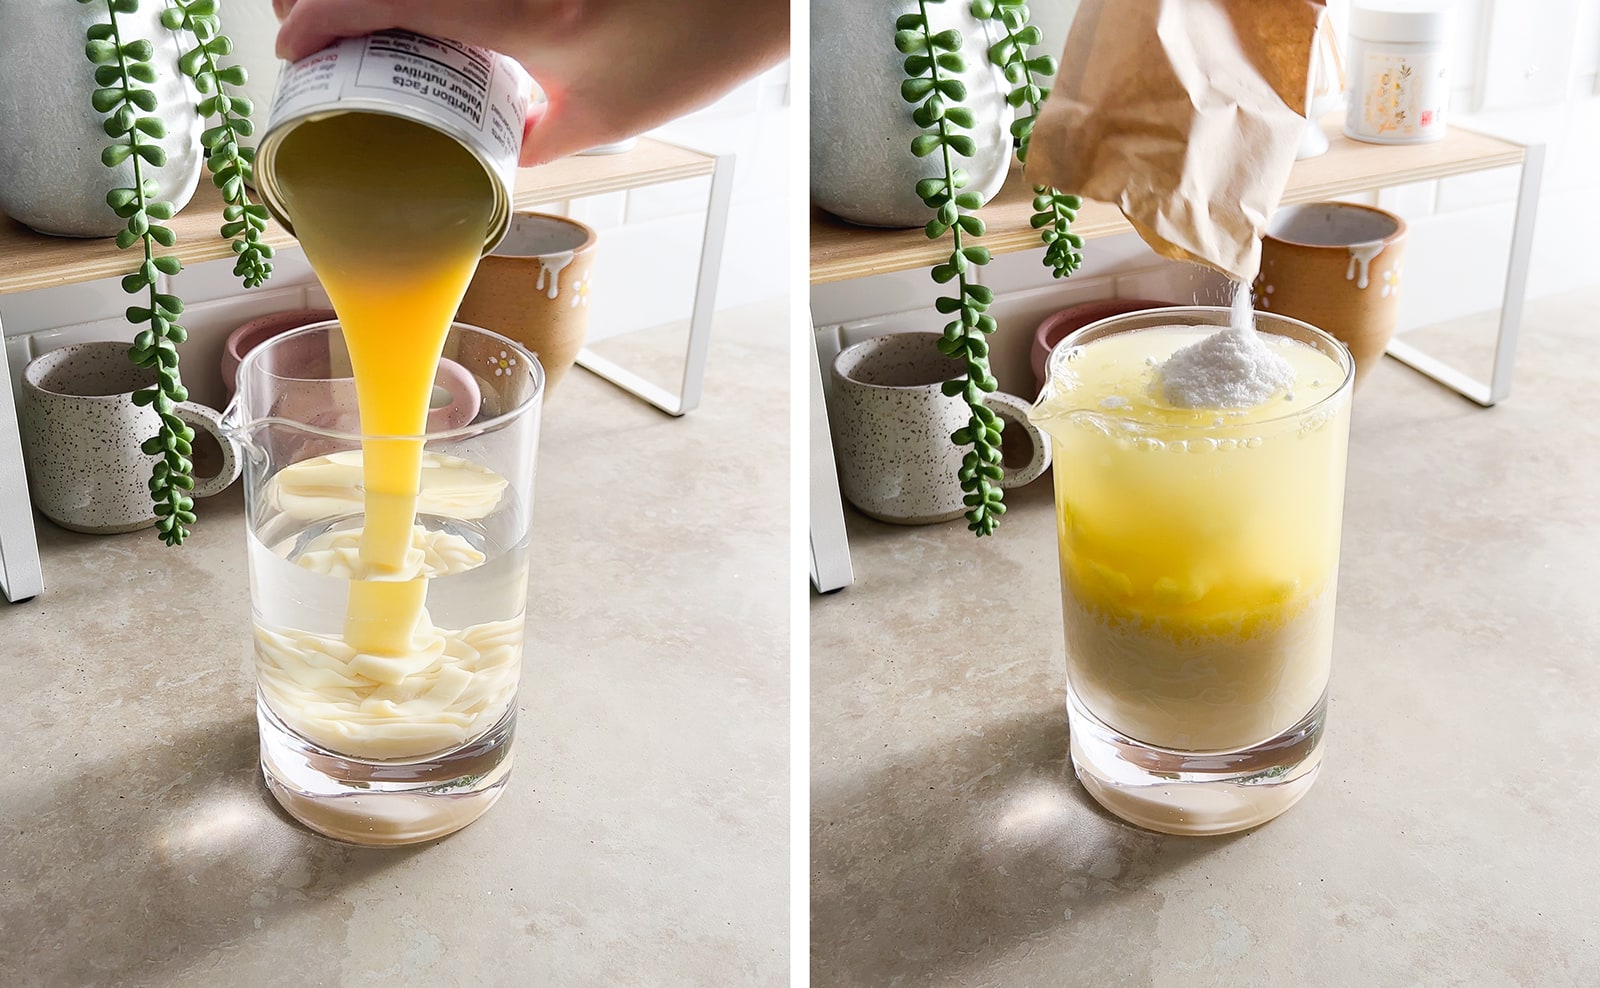 Left to right: pouring a can of condensed milk into glass of water, pouring powder into jar.